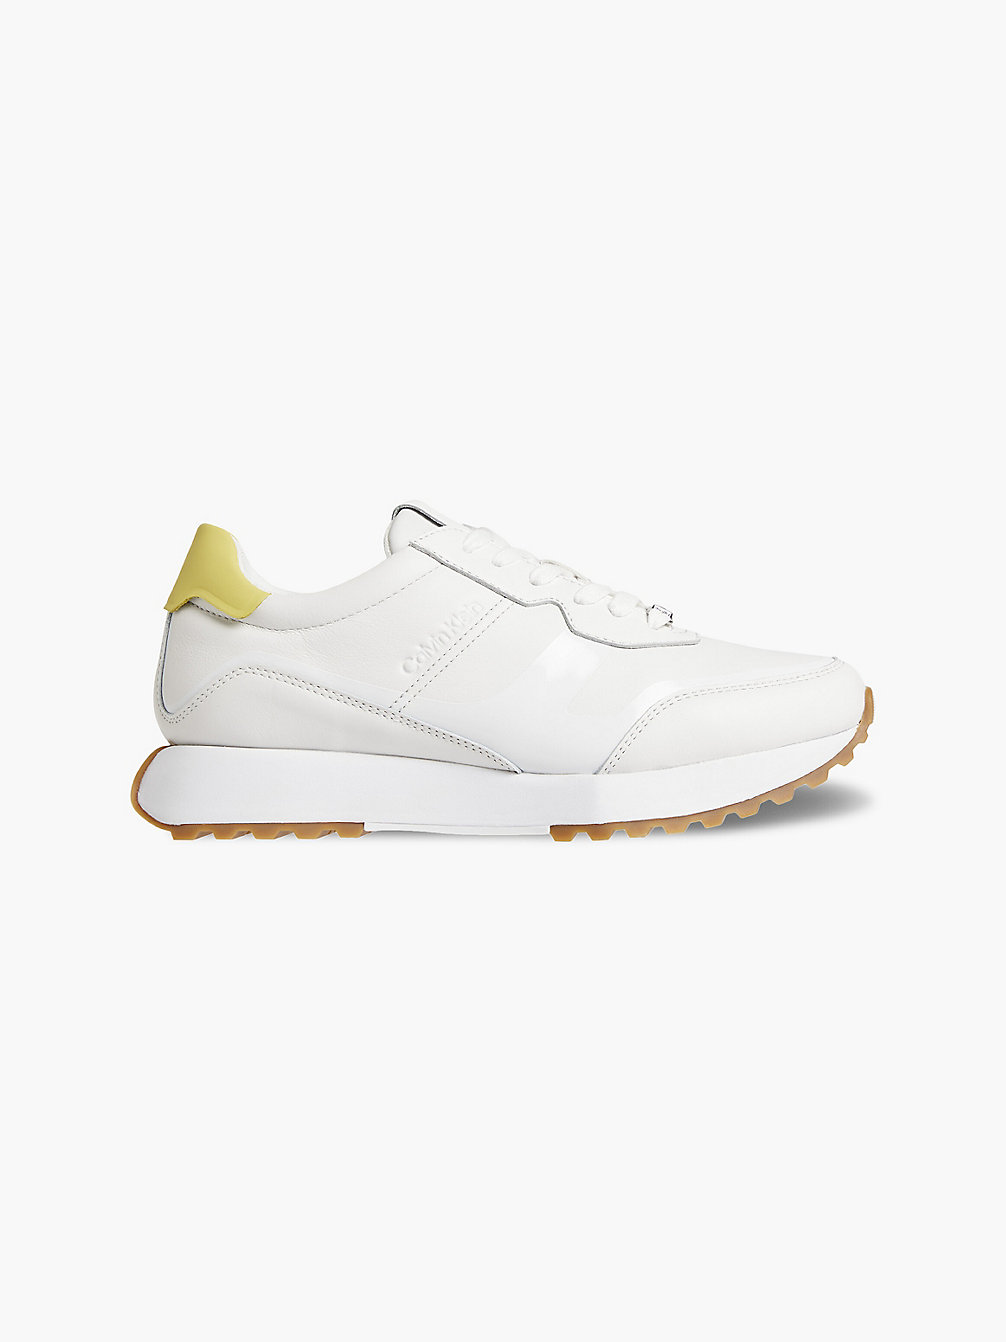 CK WHITE Leather Trainers undefined women Calvin Klein